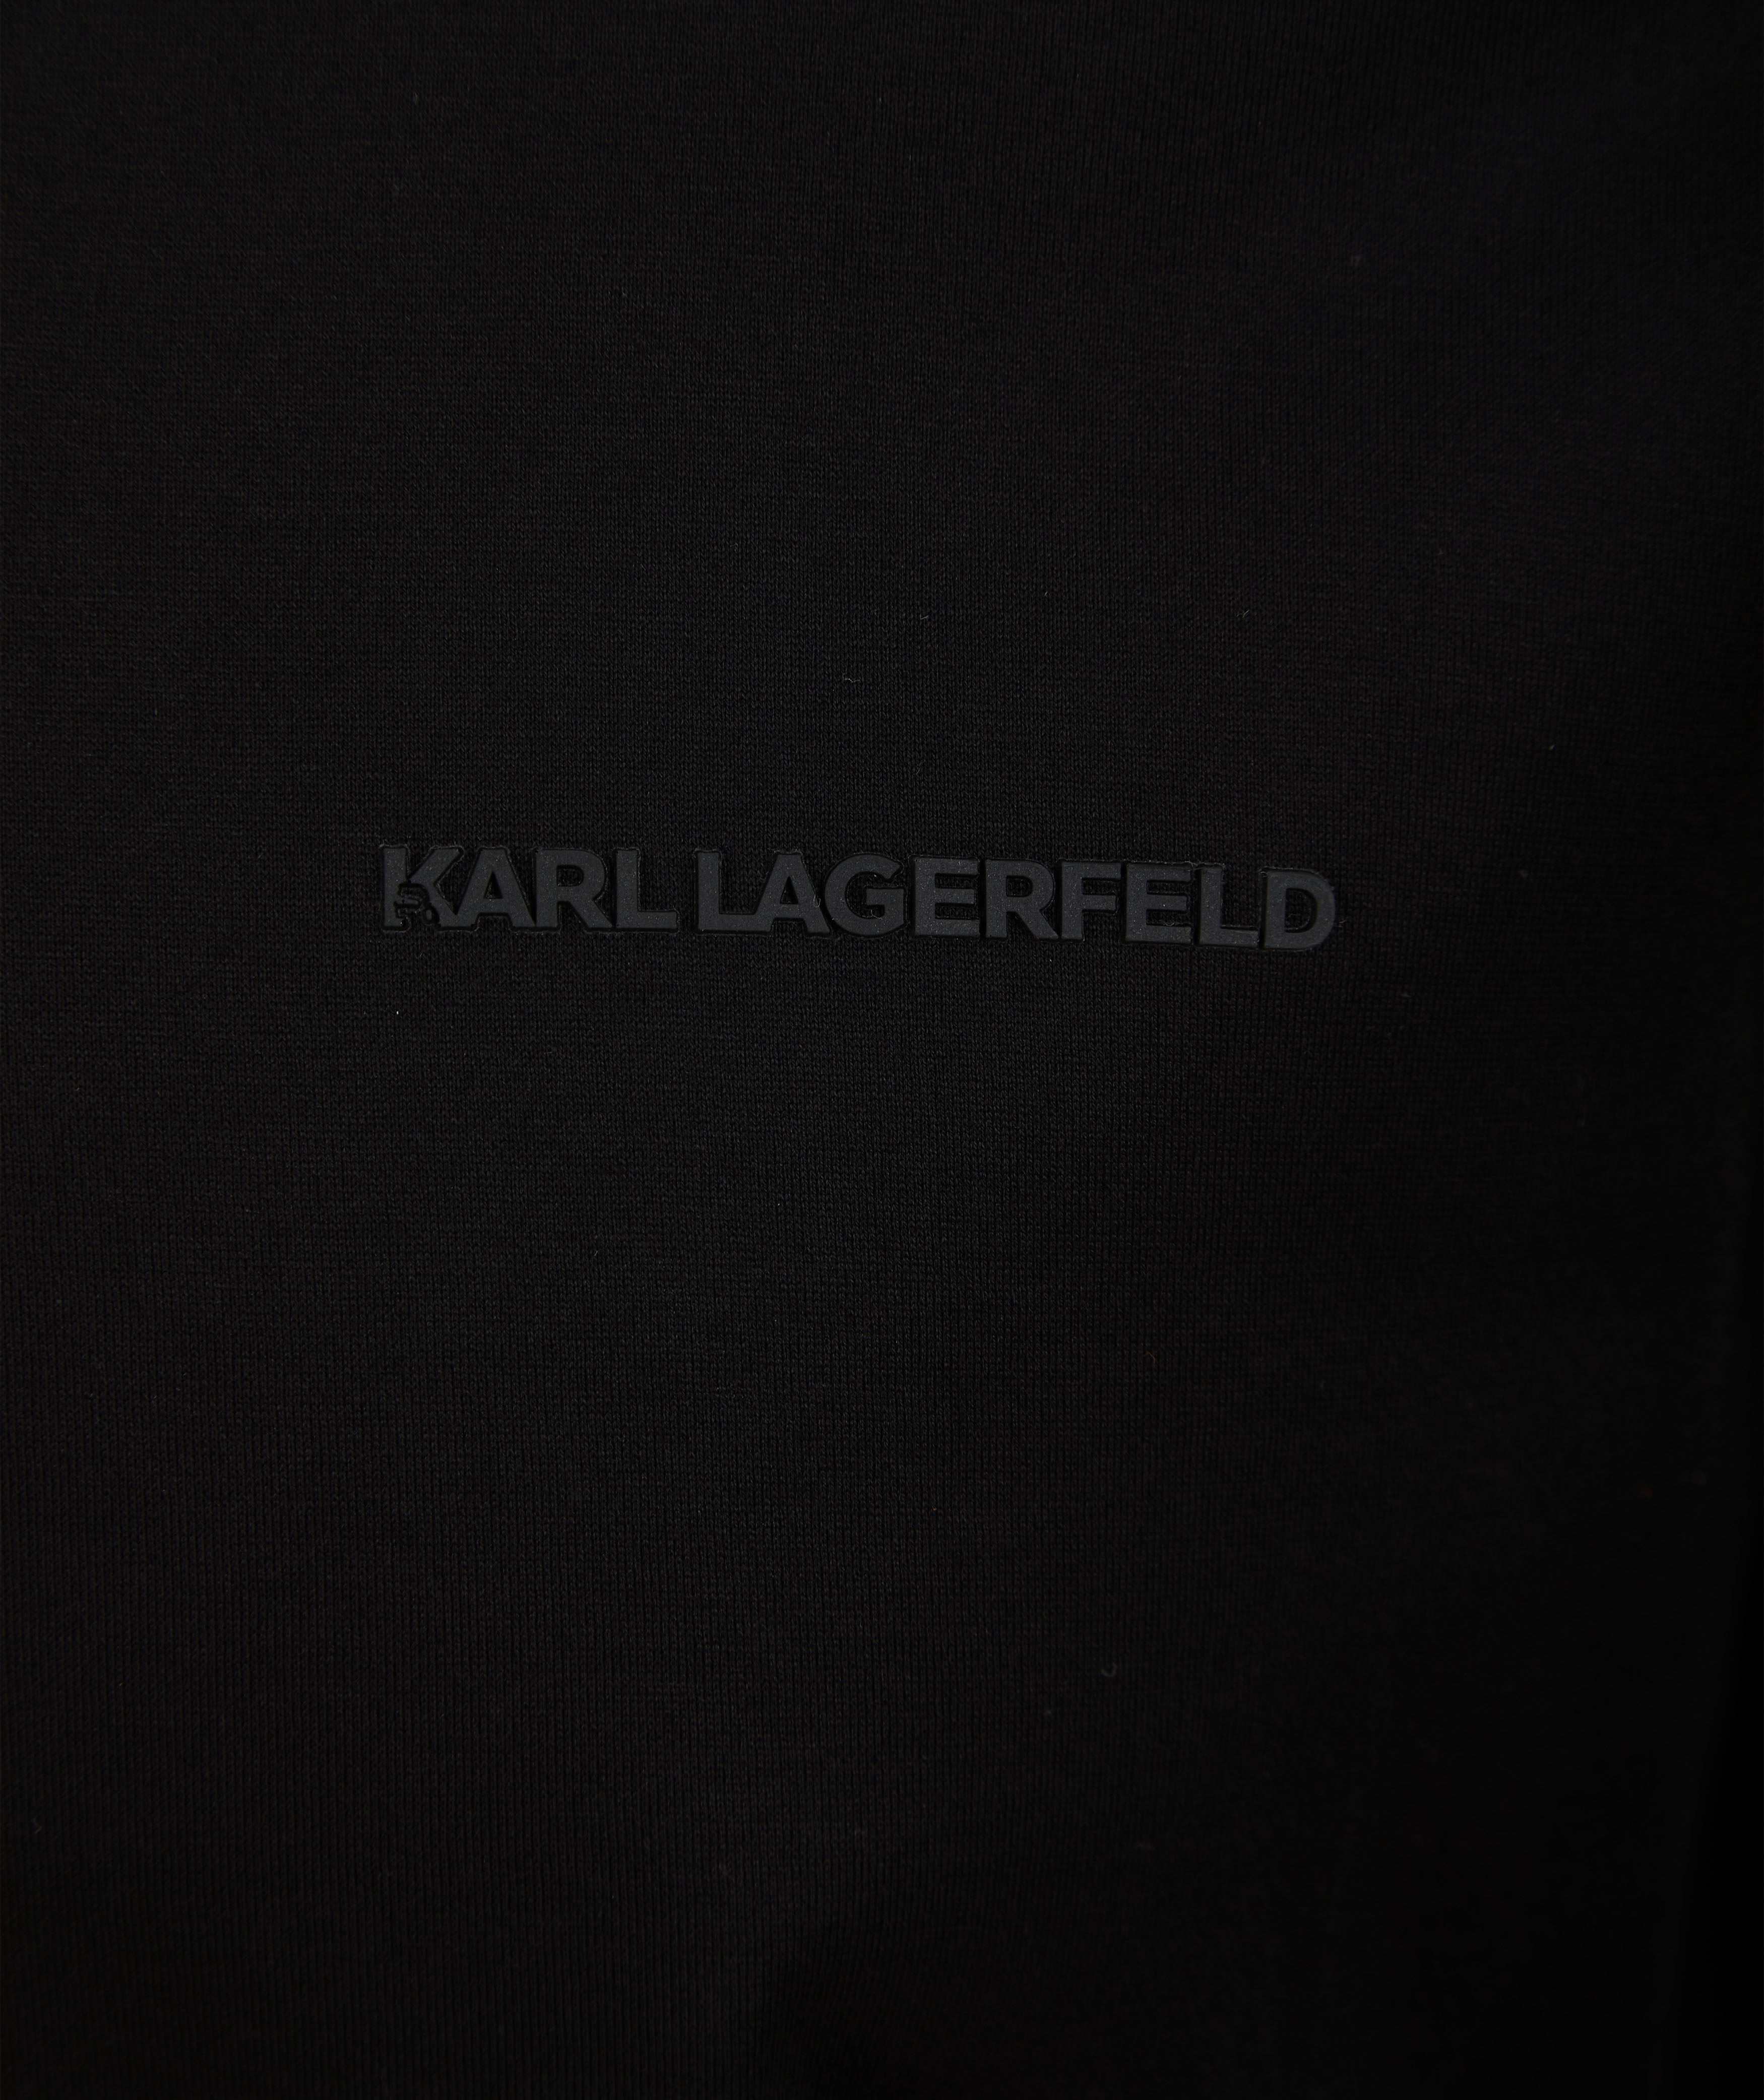 Load image into Gallery viewer, Lagerfeld Mercerised Polo Shirt Black
